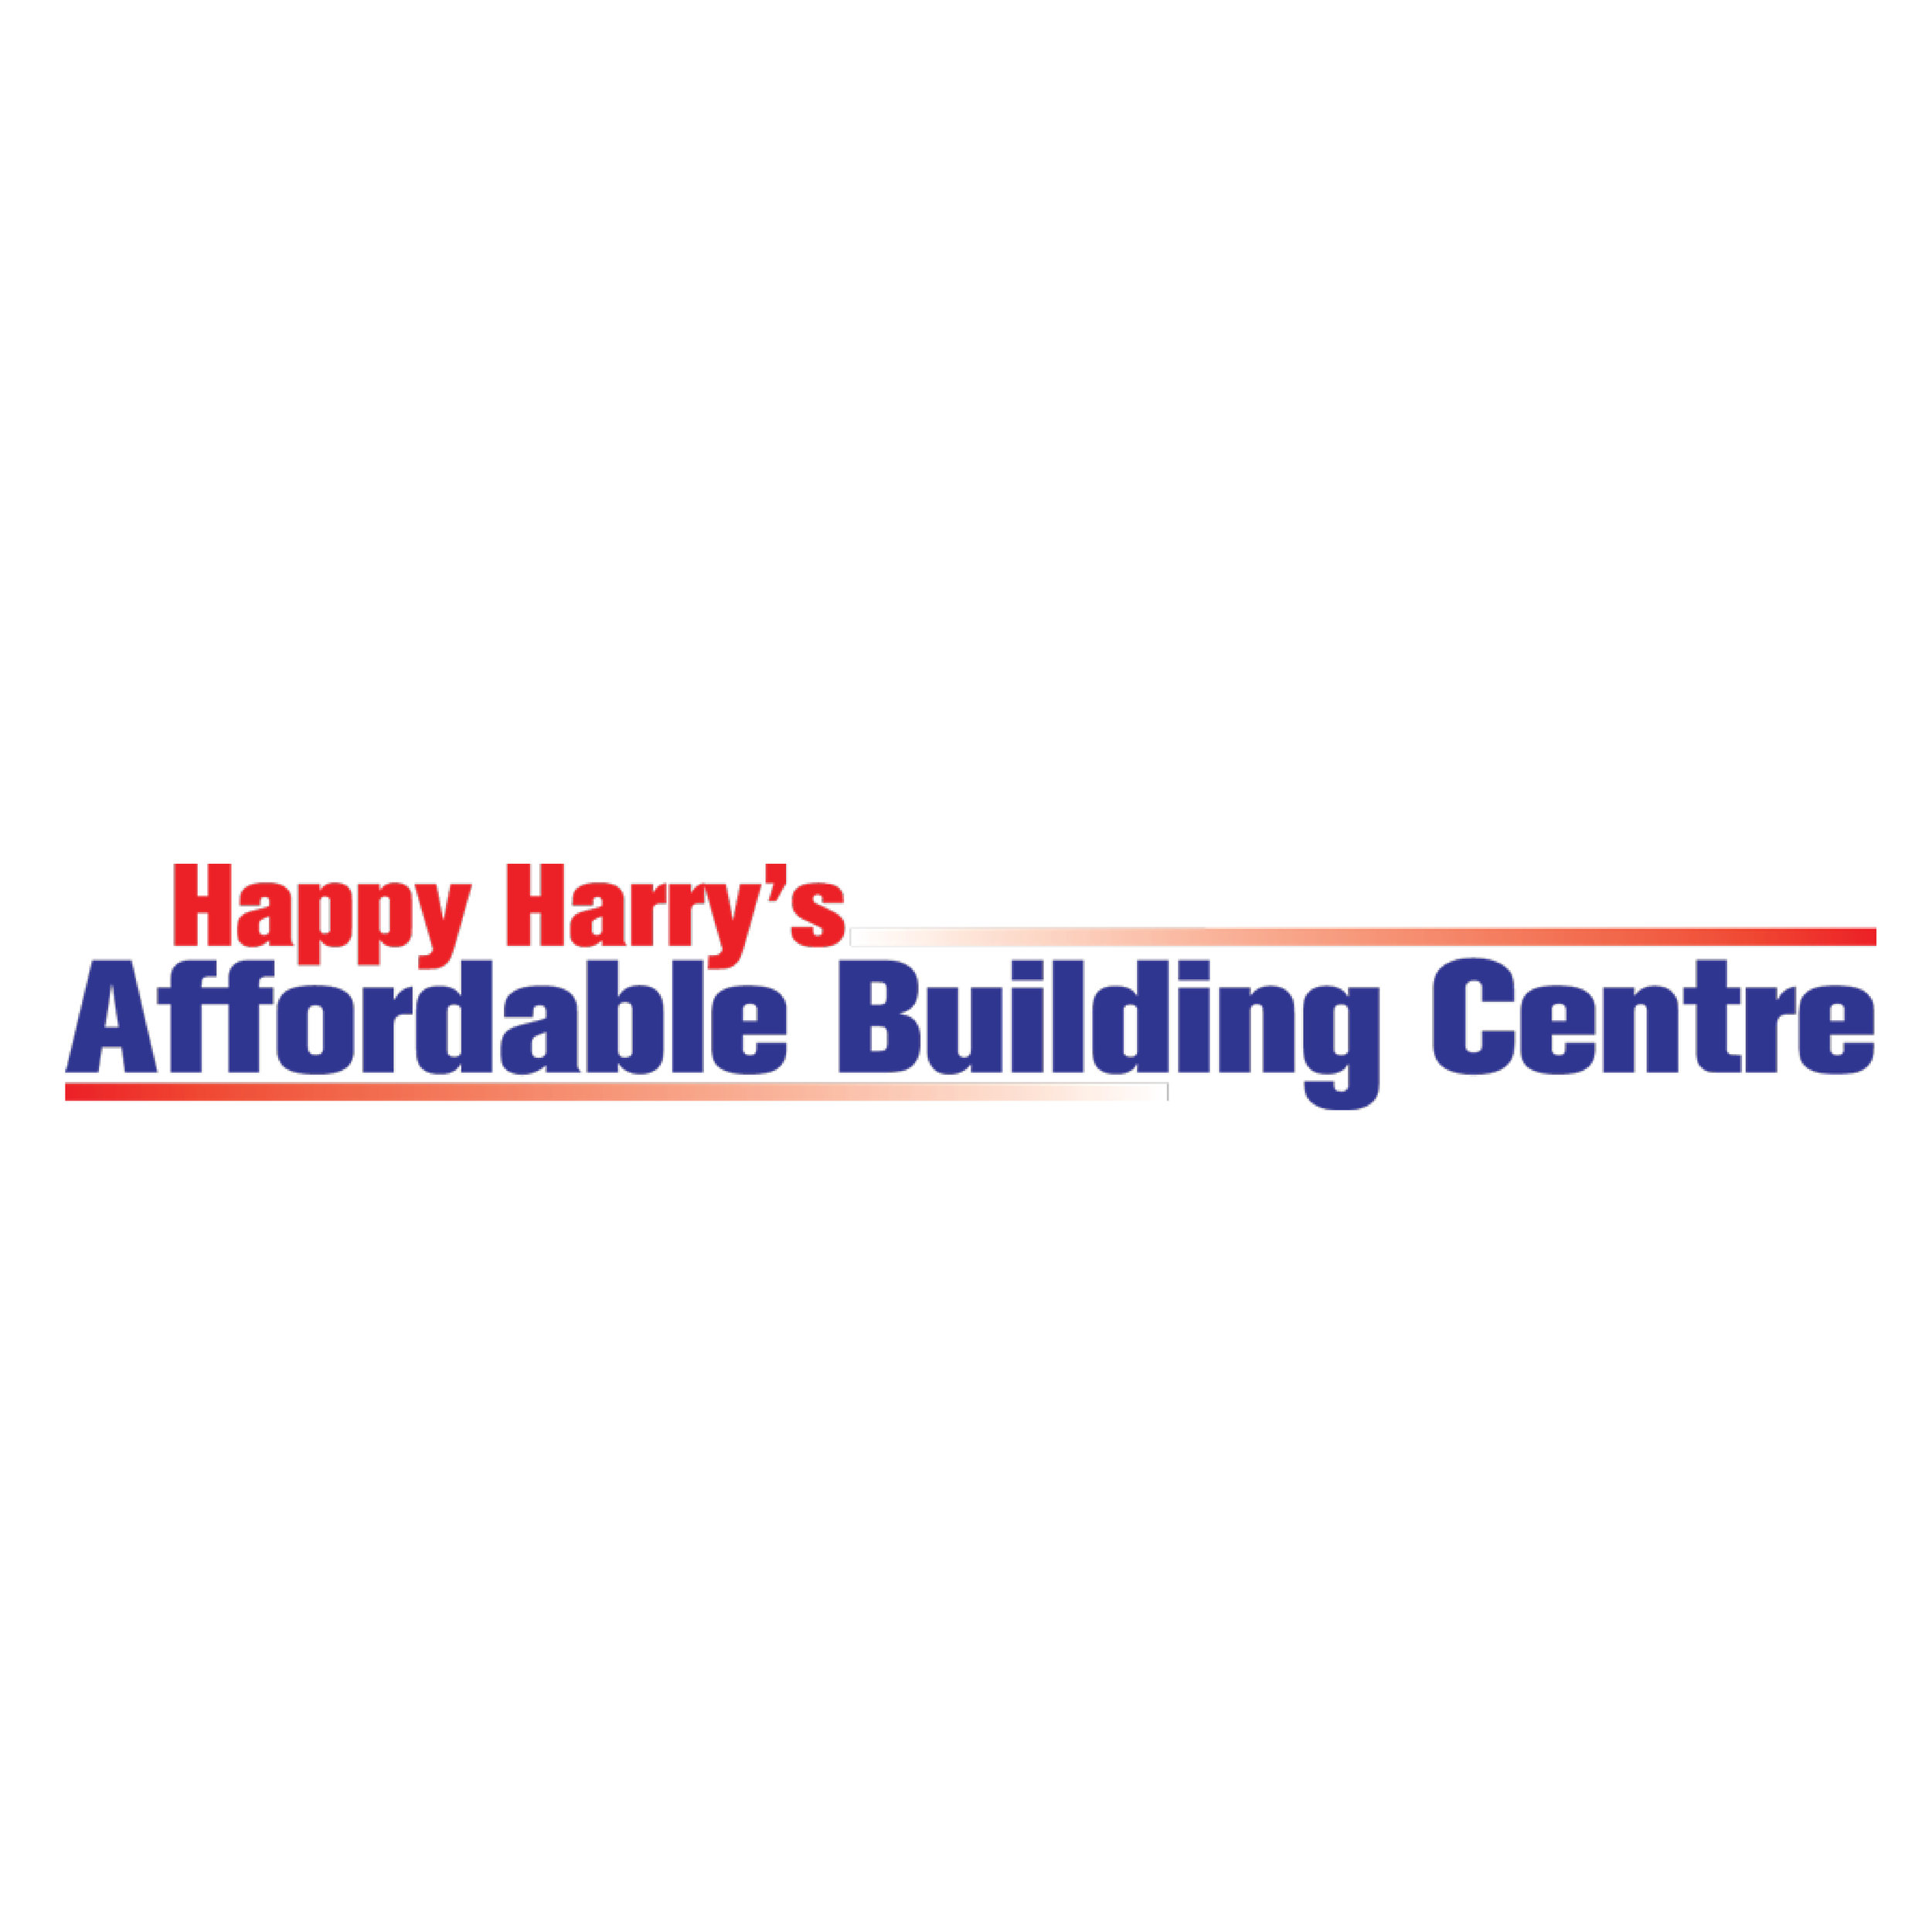 Happy Harry’s Affordable Building Centre